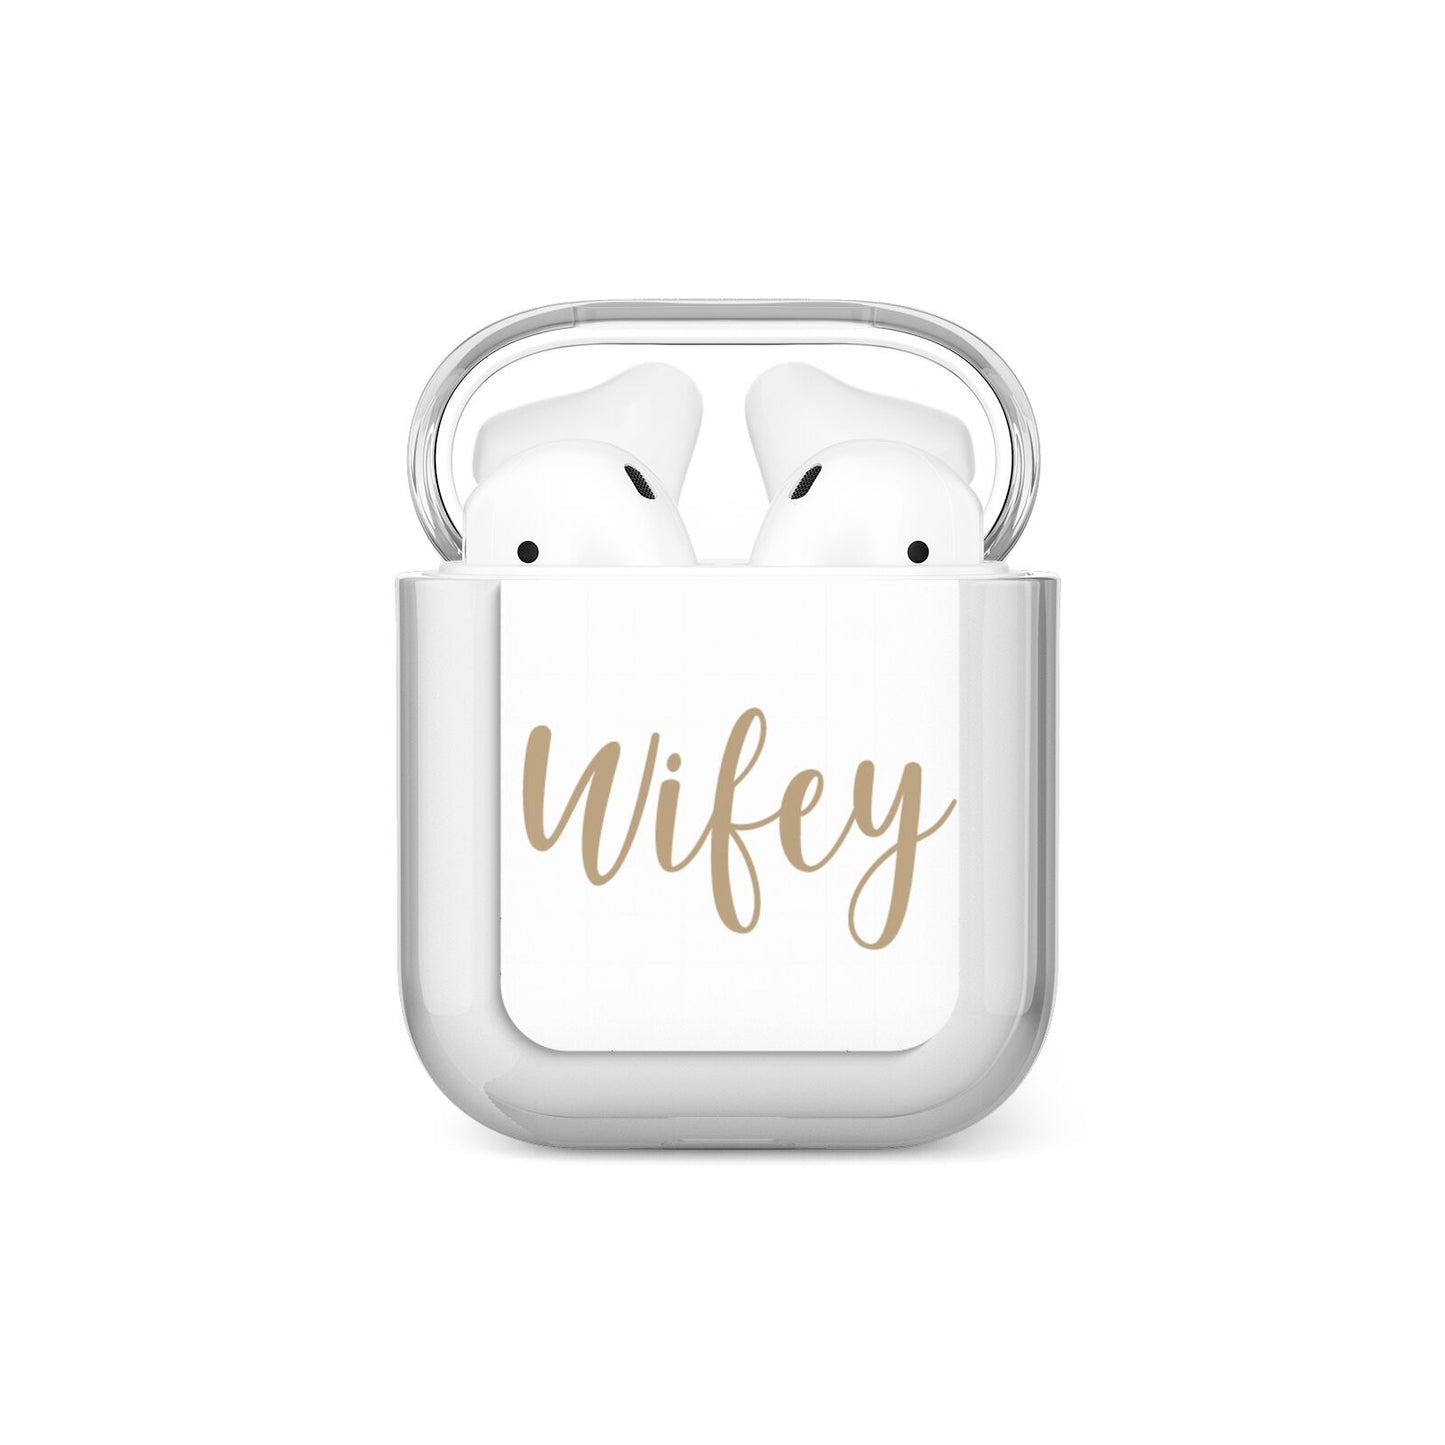 Wifey AirPods Case